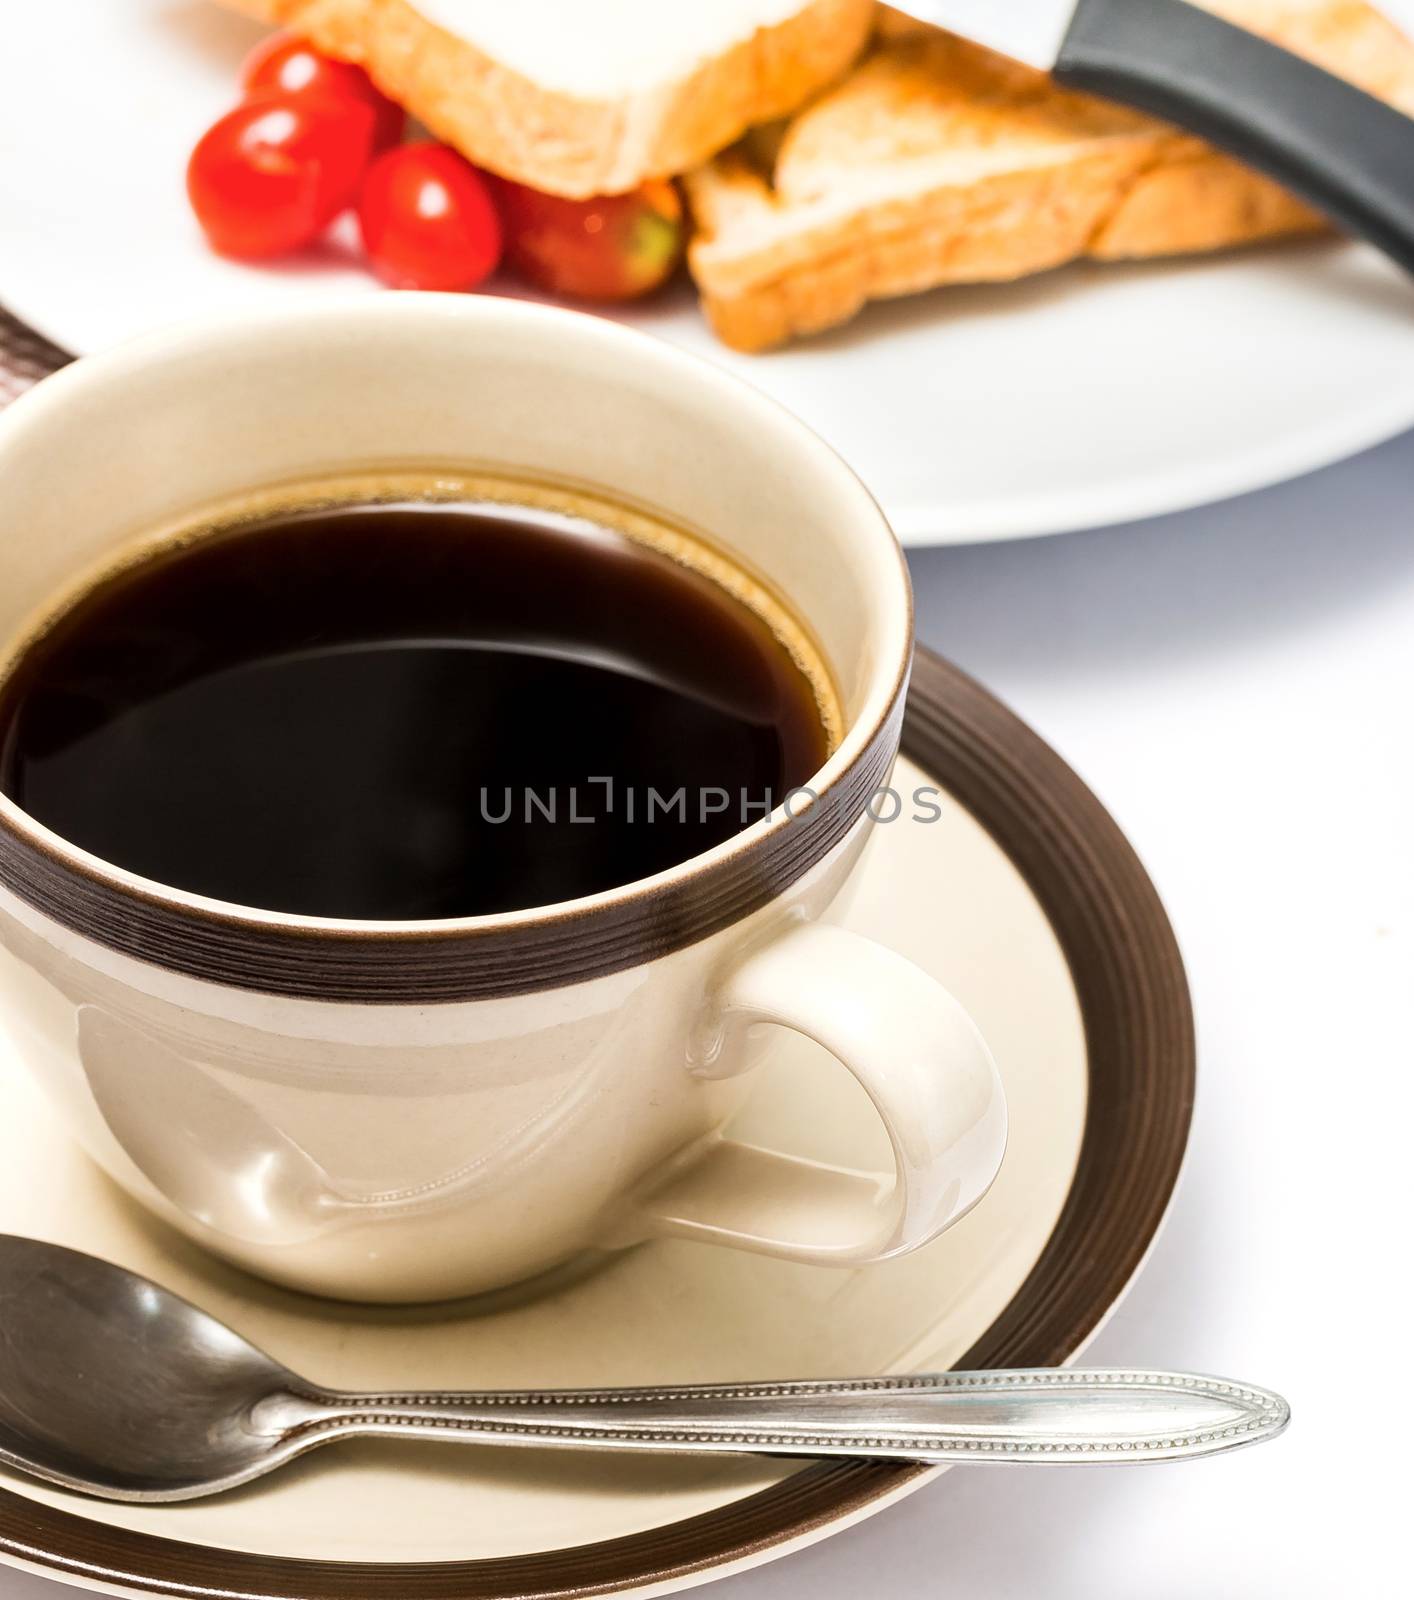 Breakfast Black Coffee Meaning Meal Time And Breaks